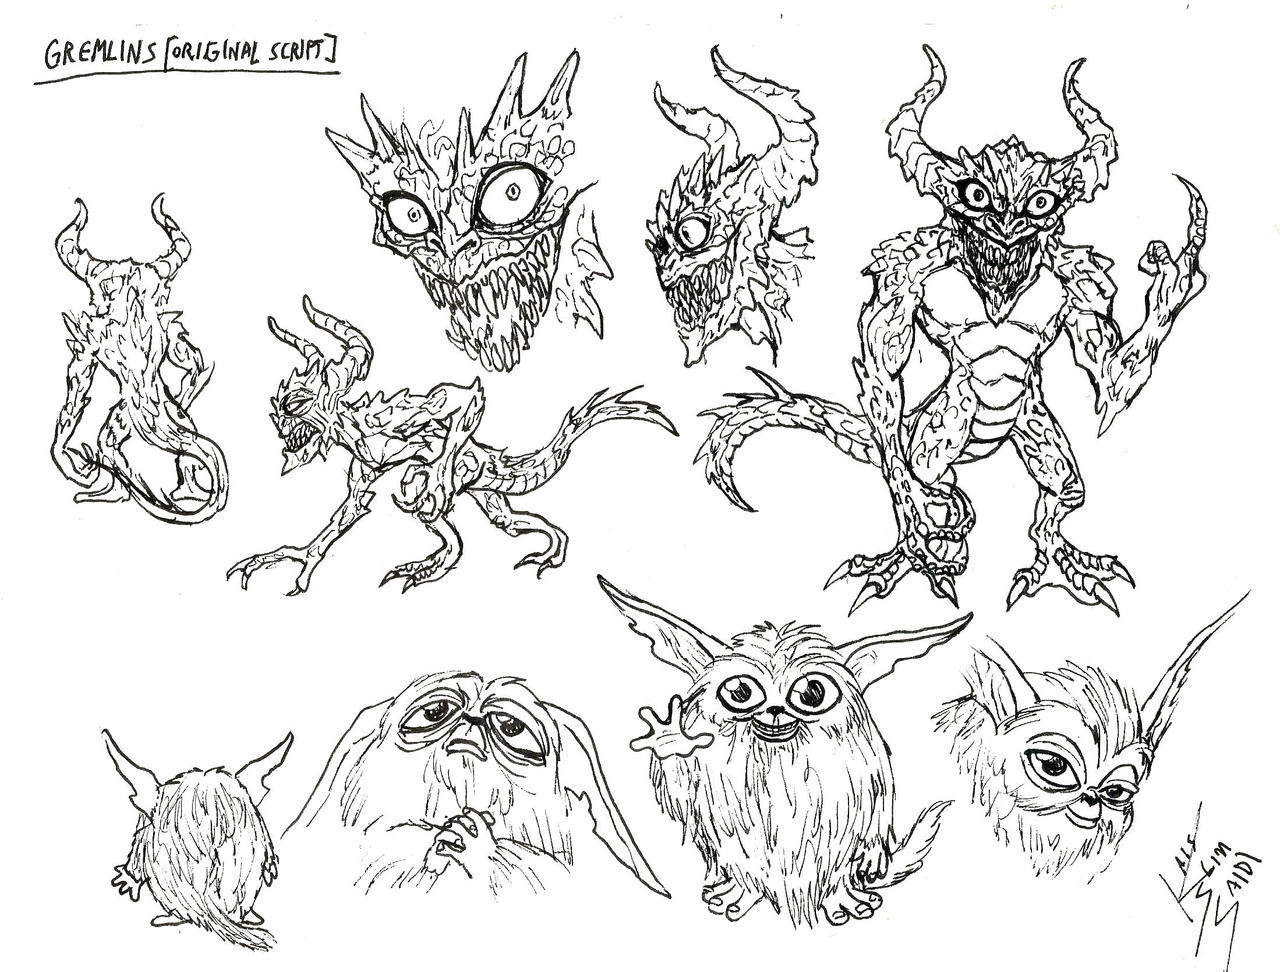 Mogwai initial proof of concept prototypes : r/Gremlins